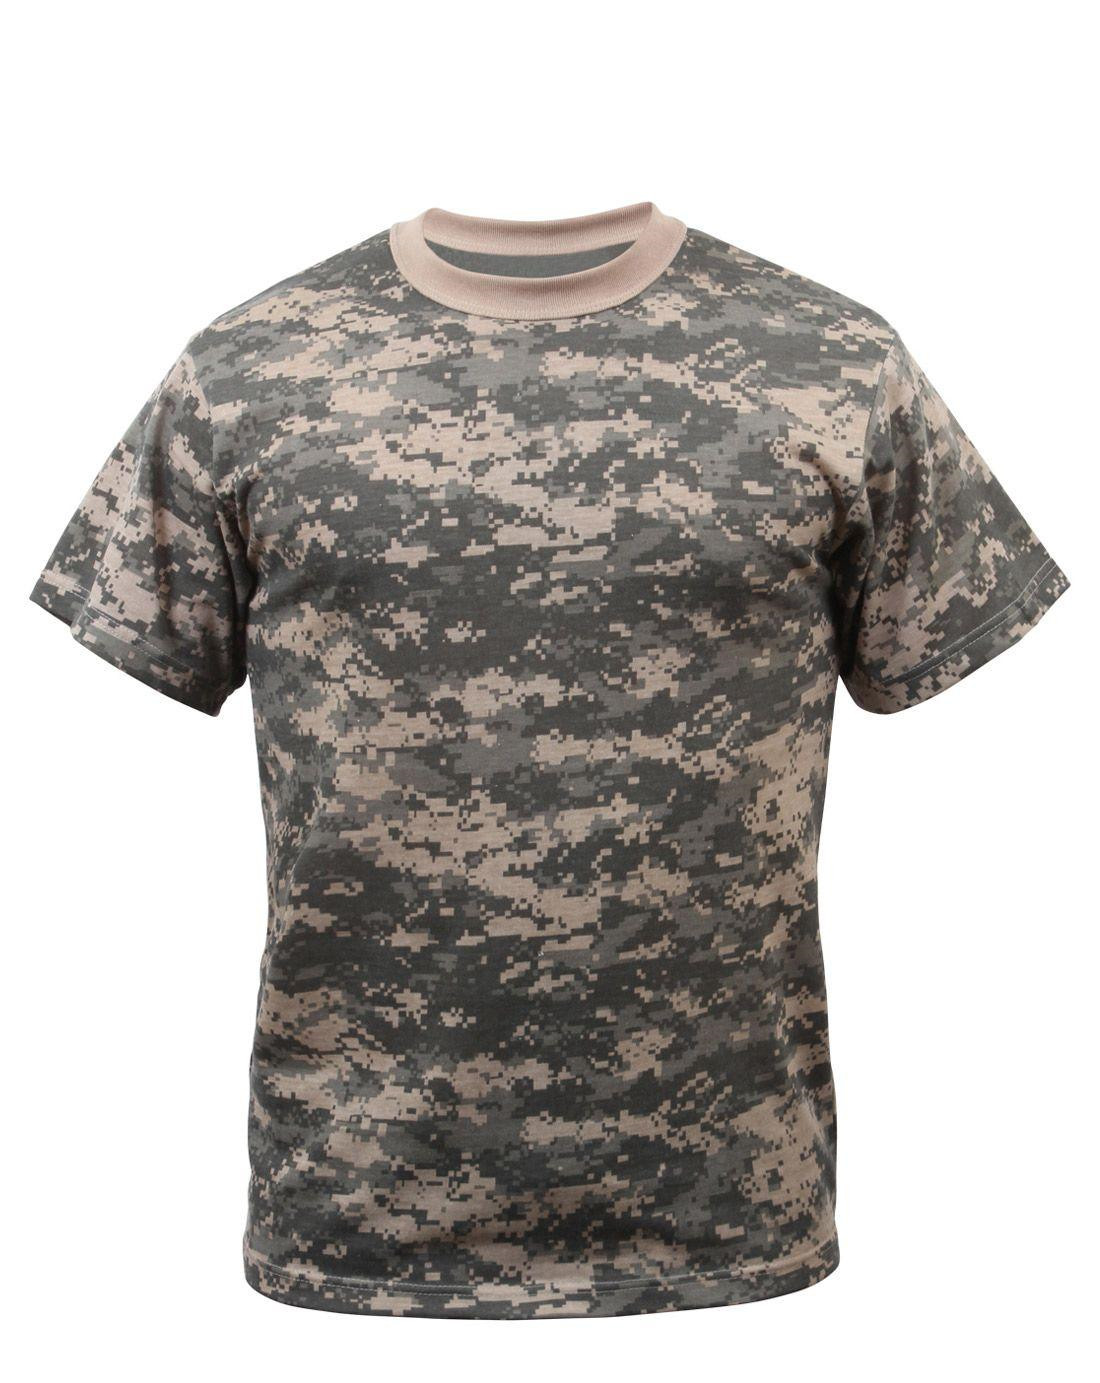 Rothco T-shirt - Mange Camouflager (ACU Camo, L)